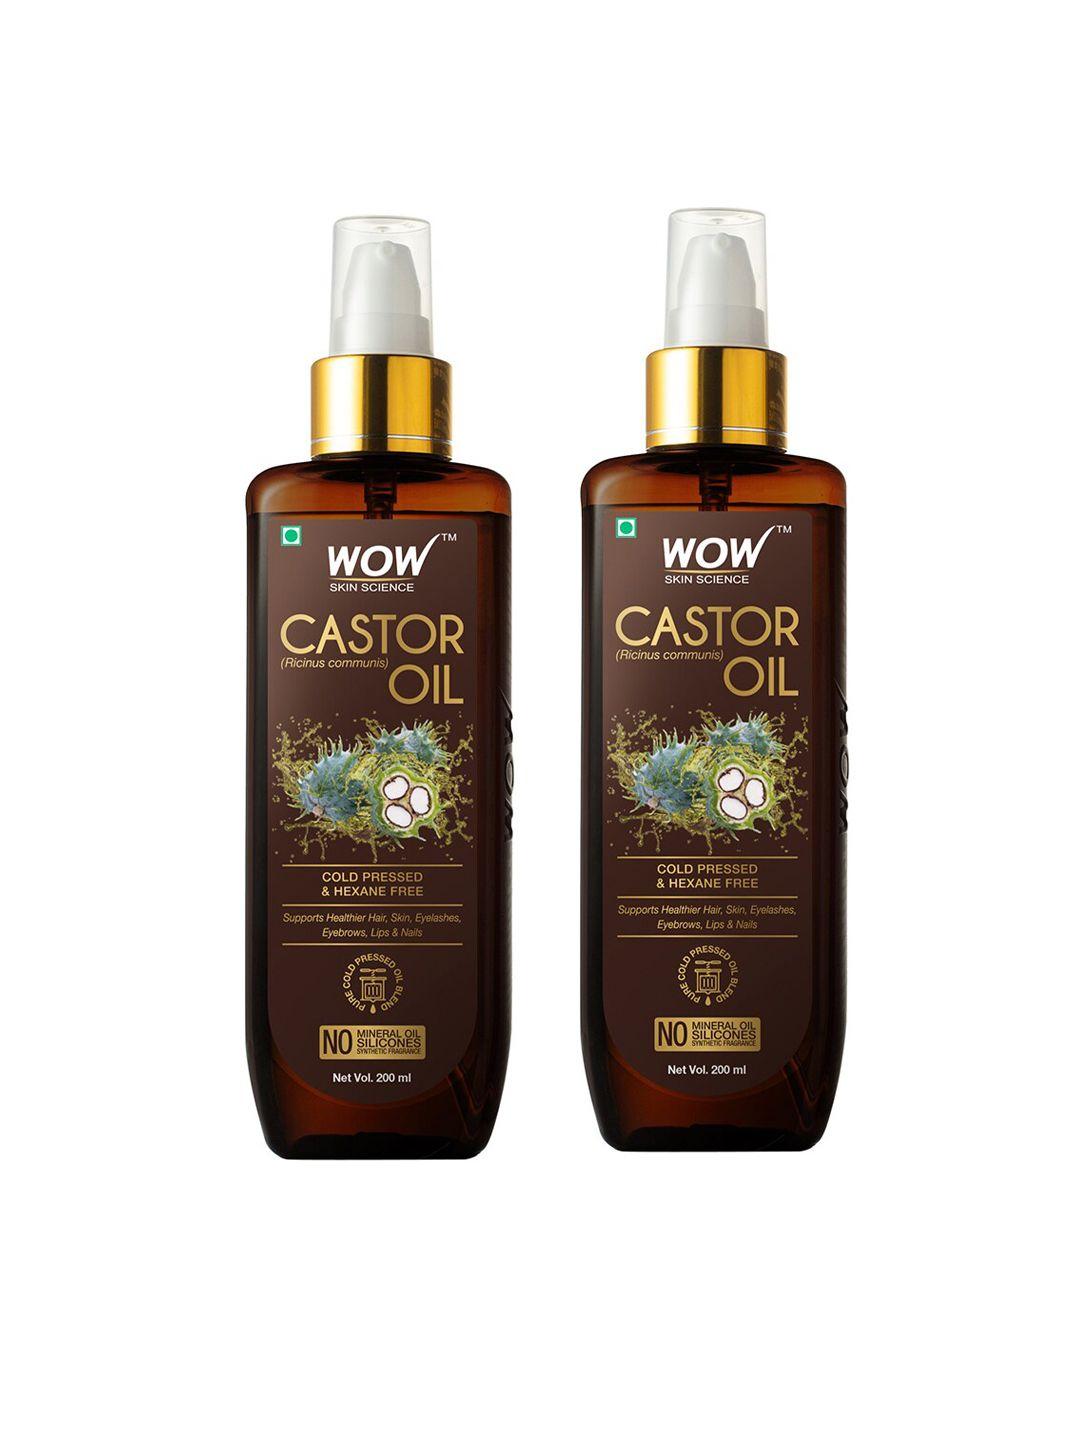 wow skin science set of 2 cold pressed castor oil - 200 ml each